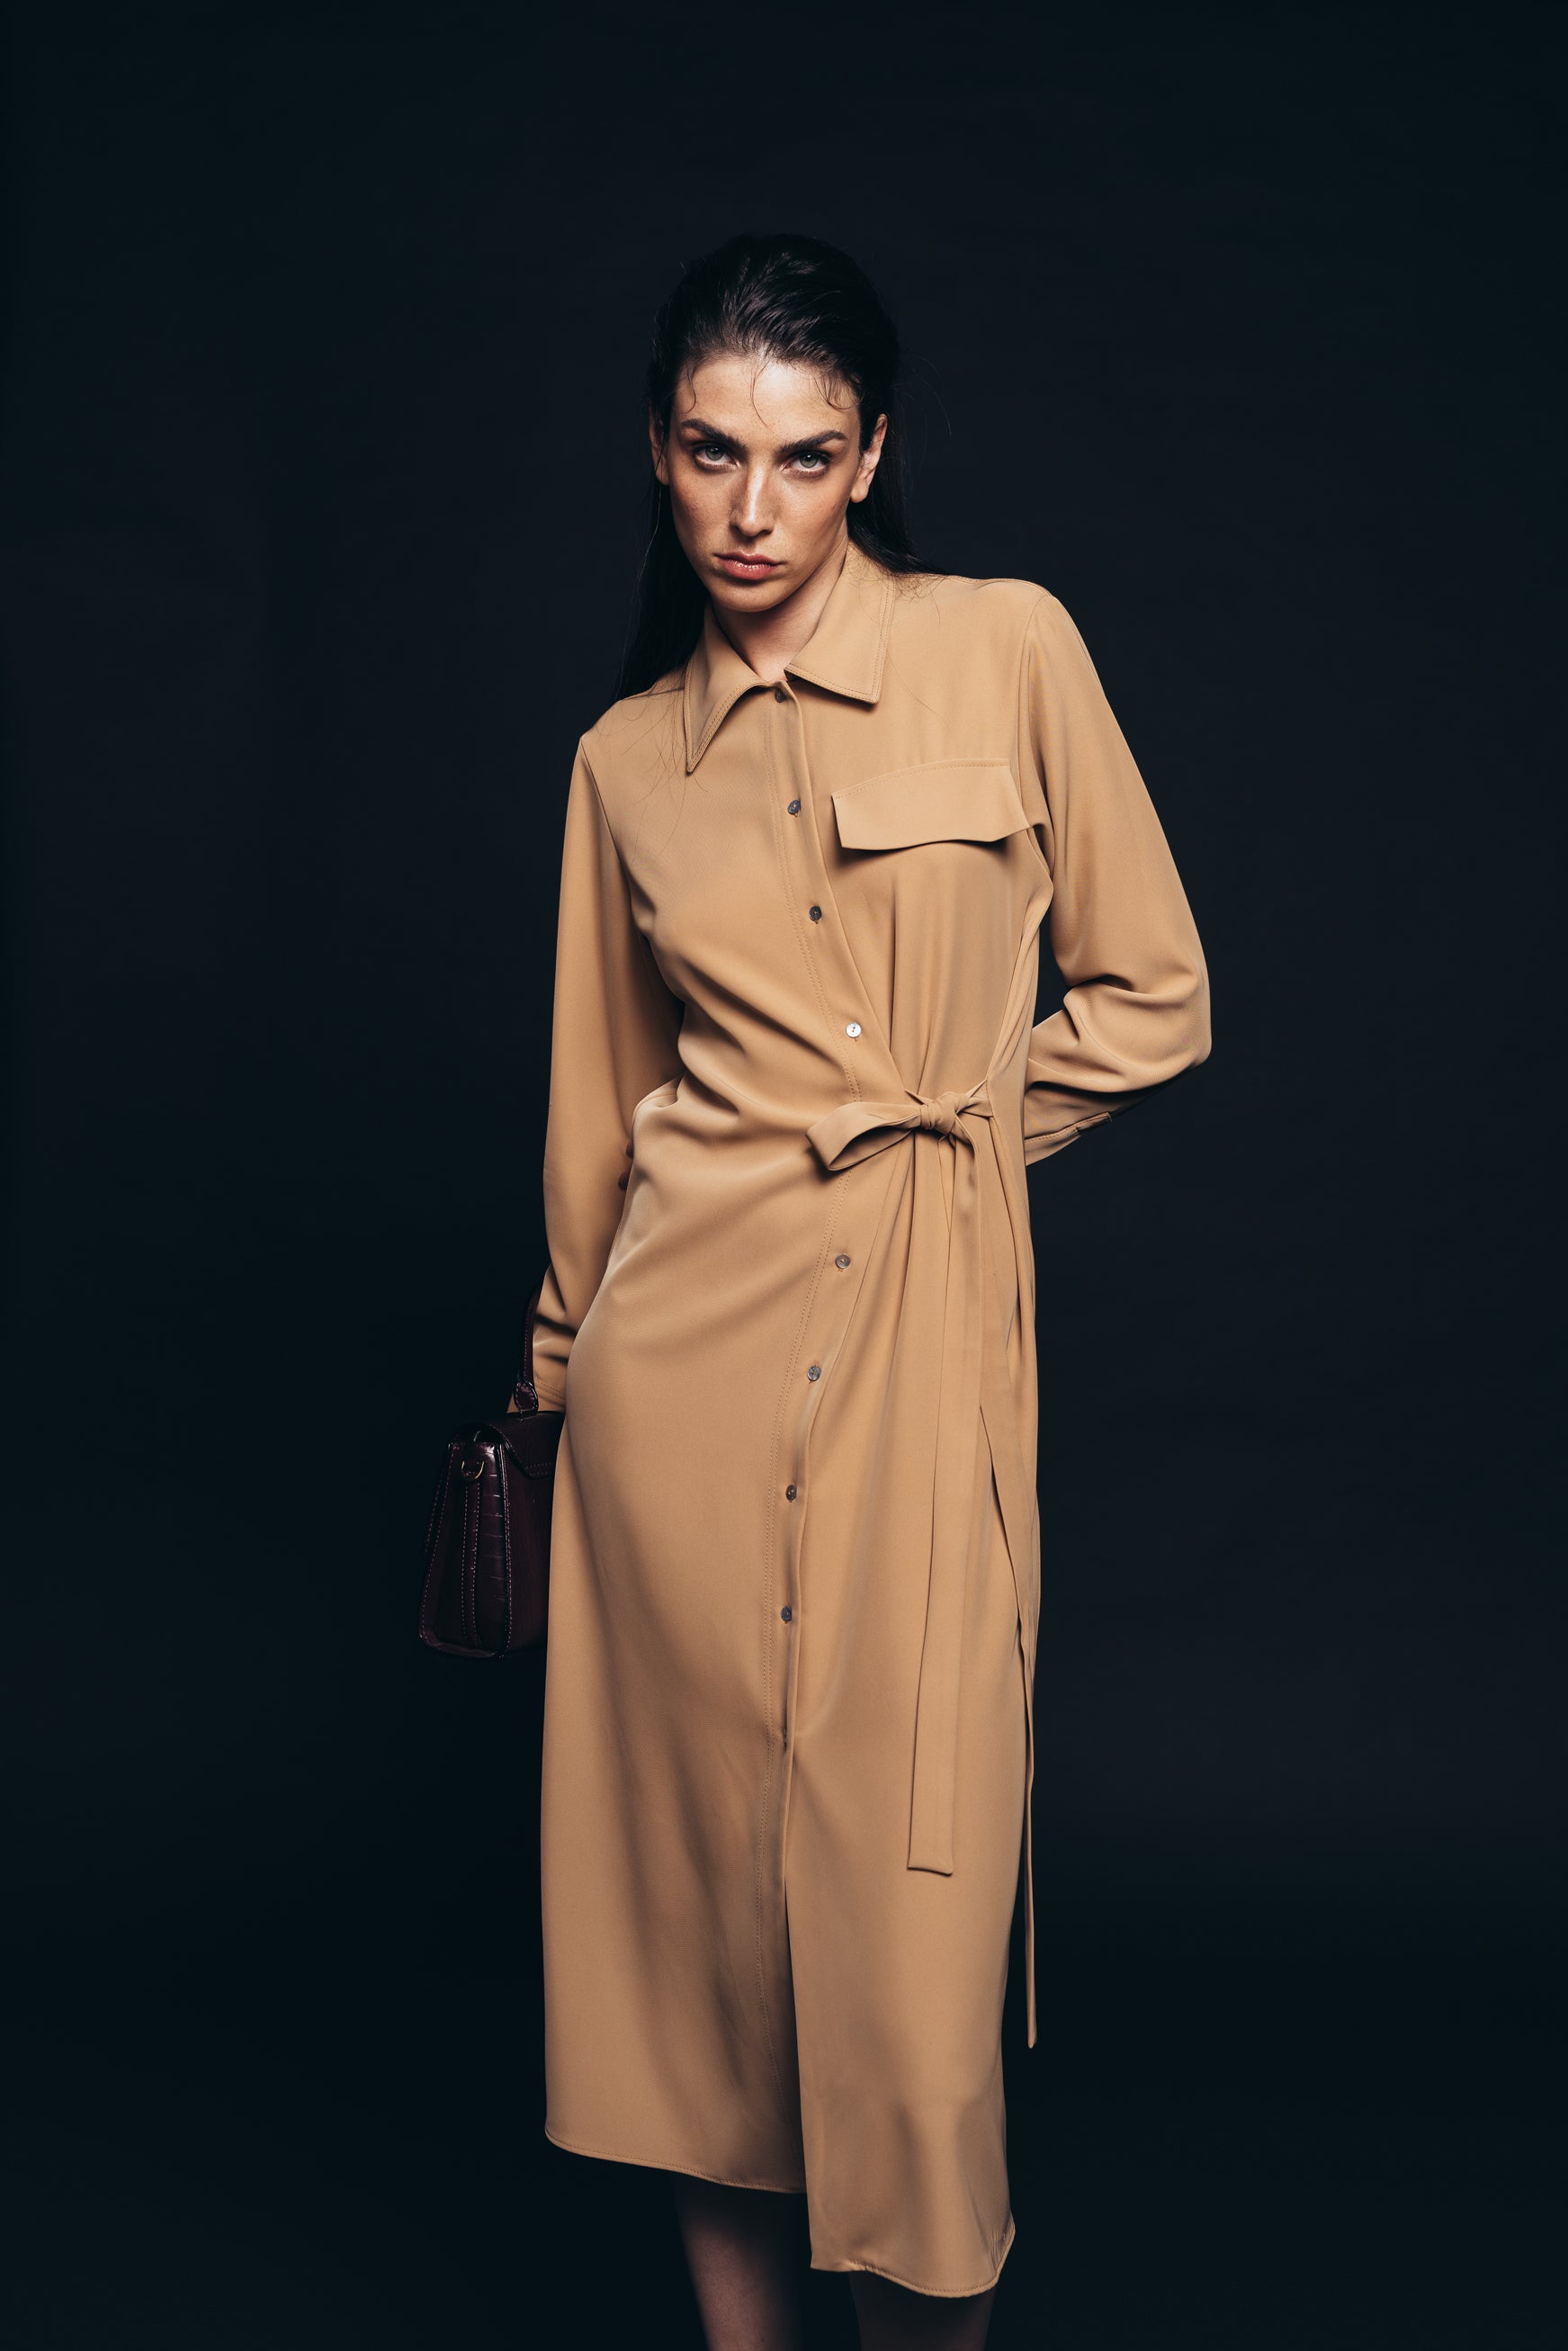 Wrap-style midi dress with long sleeves in camel